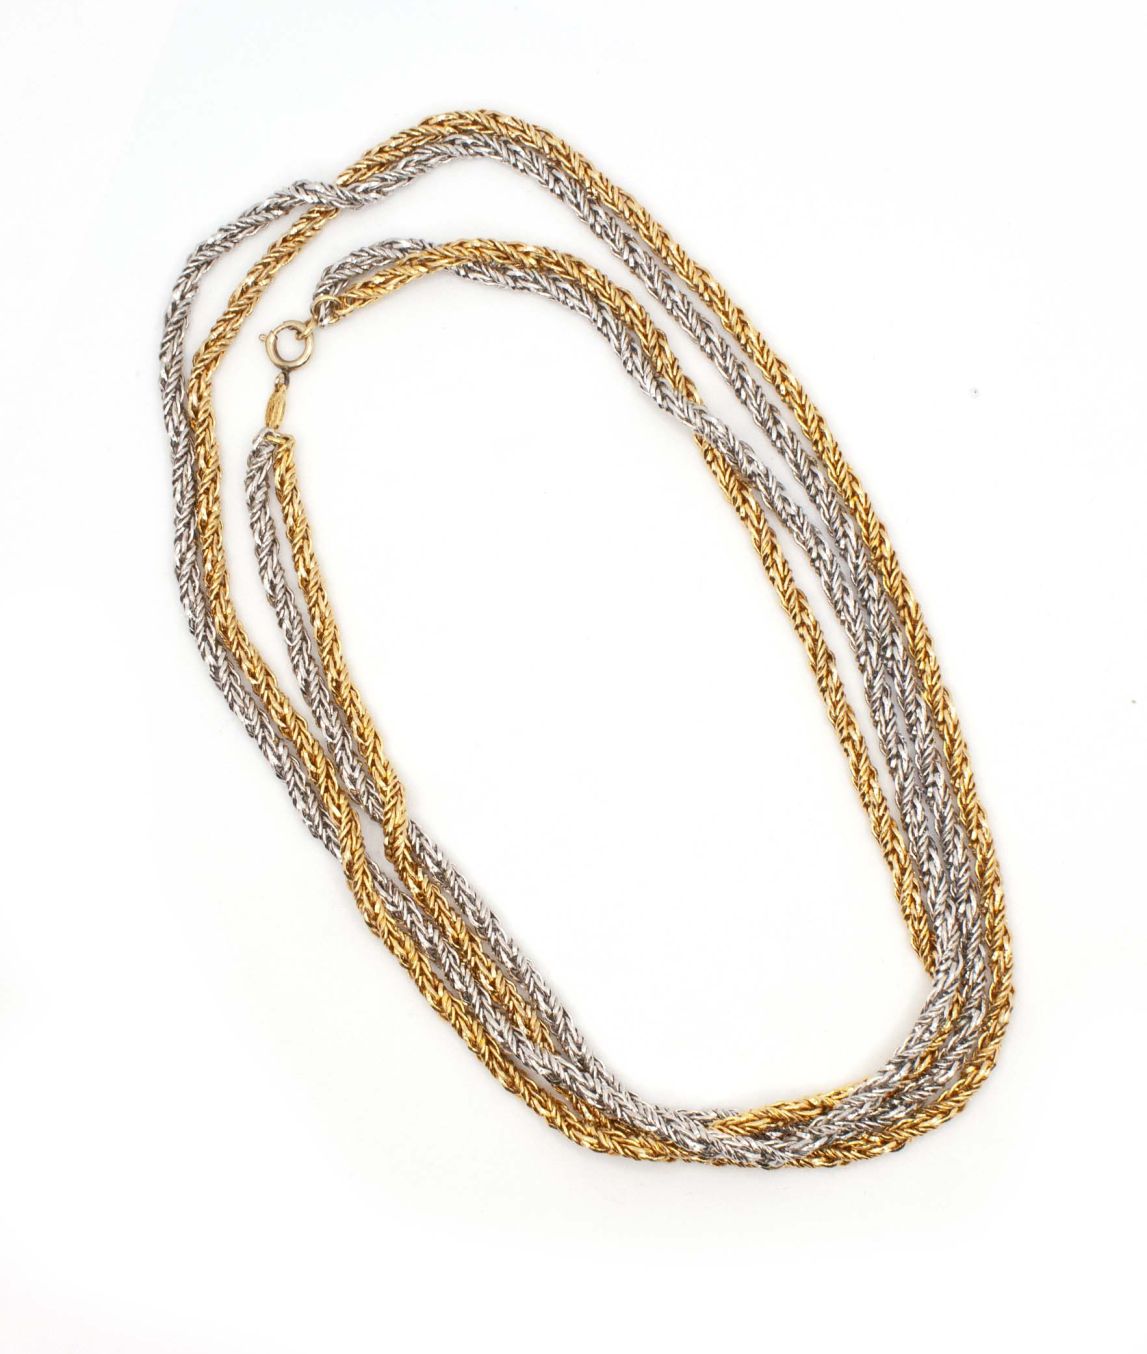 Silver and Gold Rope Chains by Grossé | Gadelles Vintage